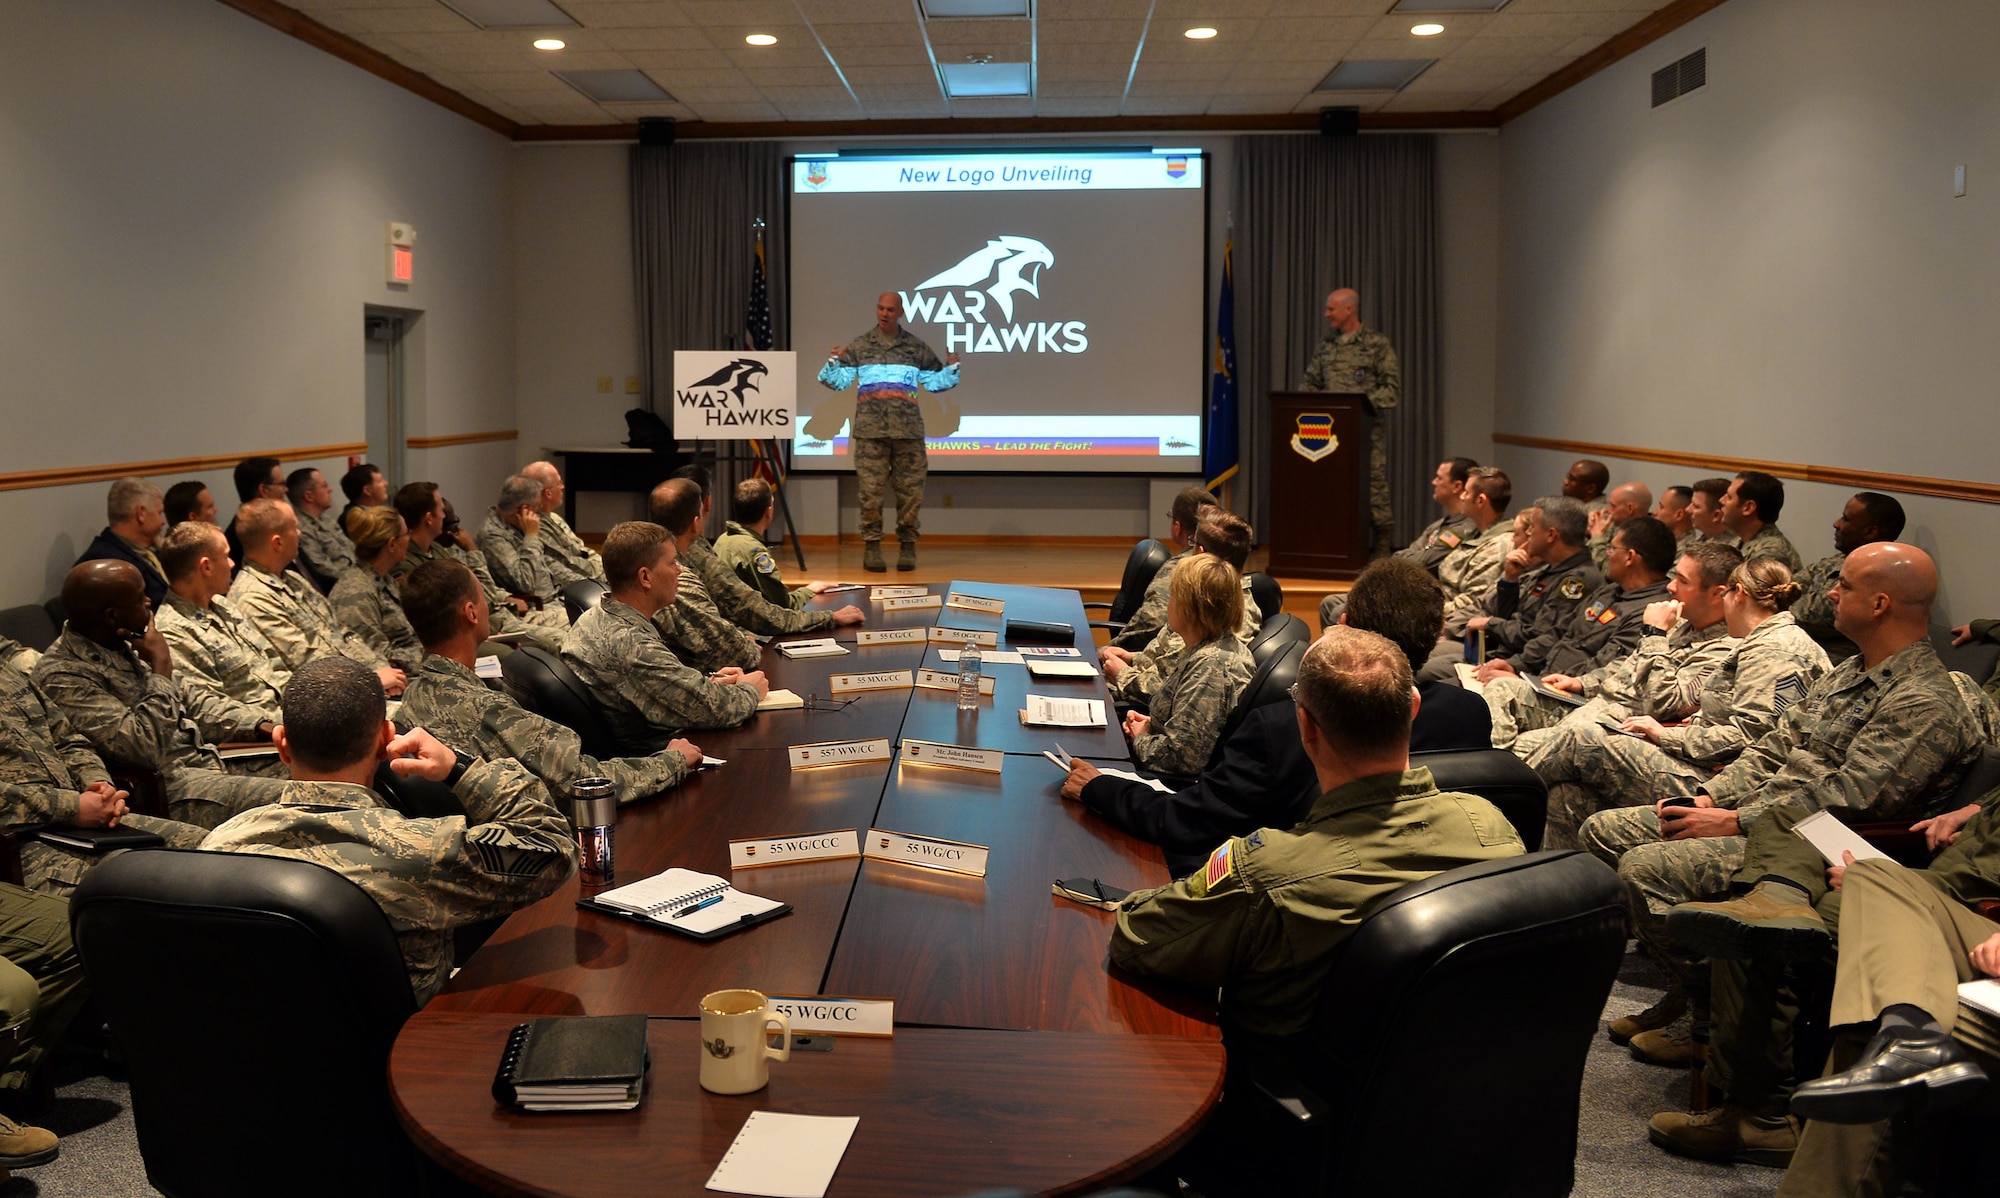 The 55th Wing leadership team looks on as Col. Michael Manion, 55th Wing commander, officially unveils the War
Hawks during a staff meeting at Offutt Air Force Base, Neb. on Jan. 25.